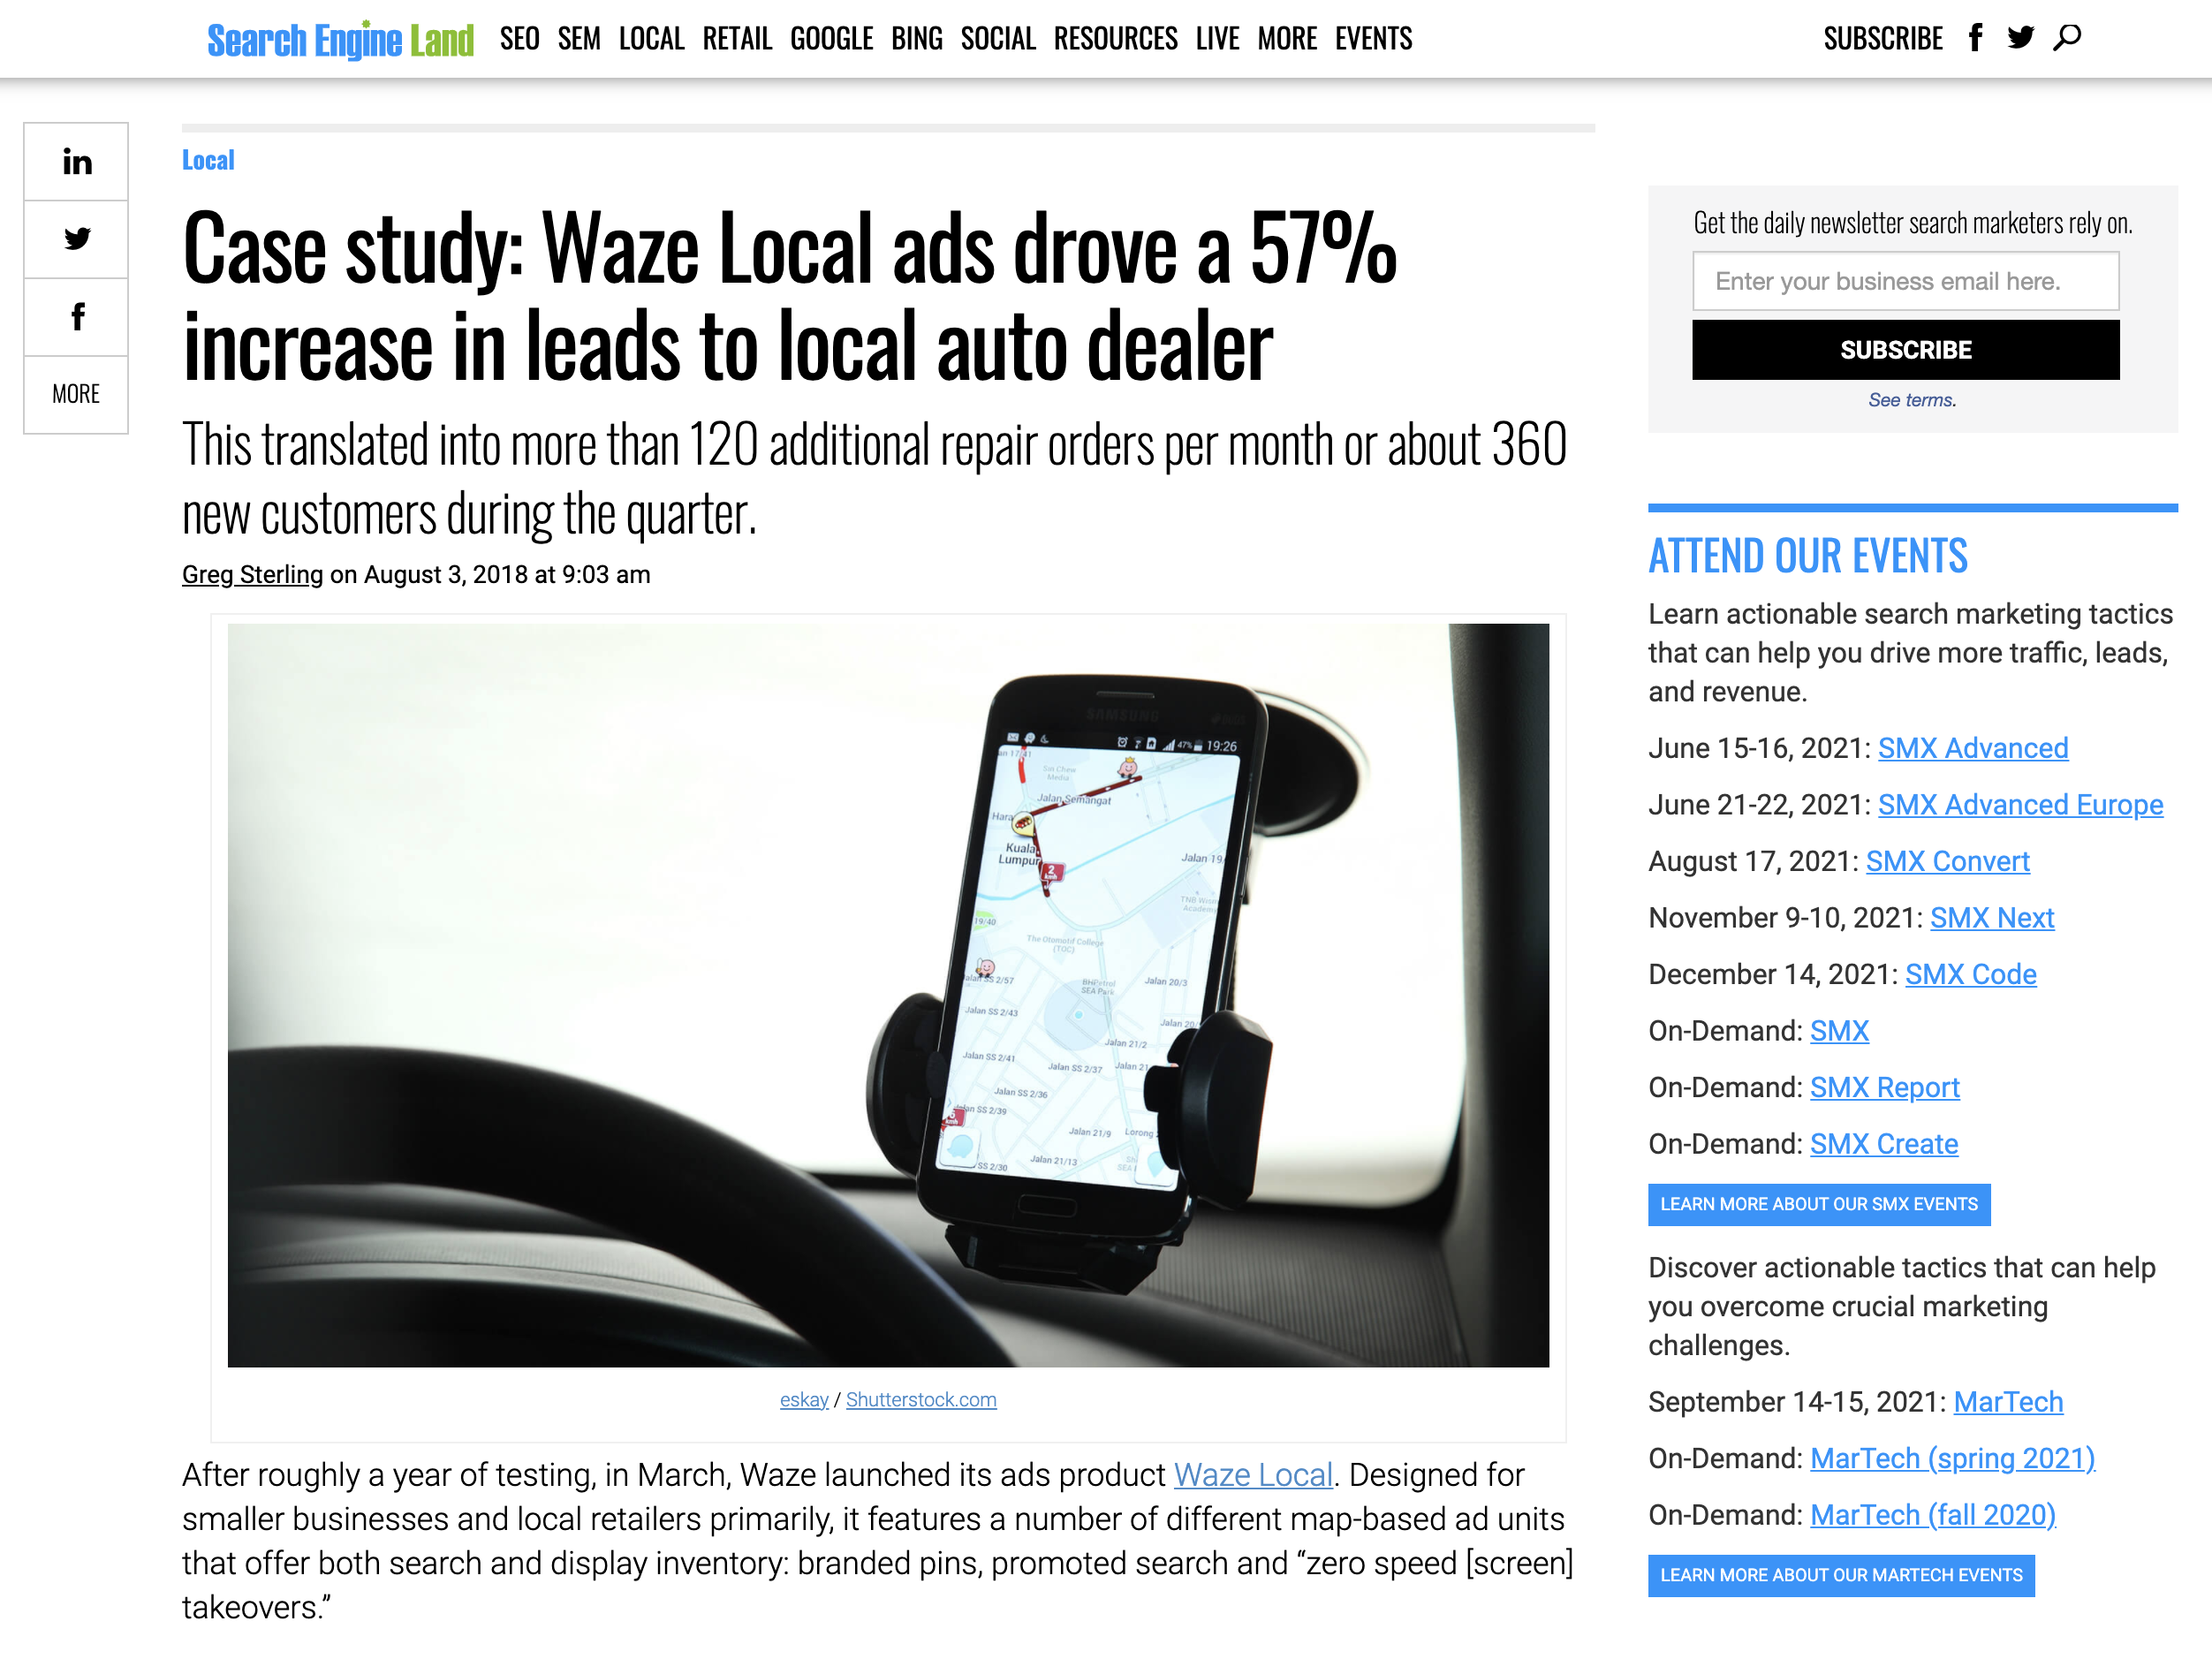 Waze Local ads drove a 57% increase in leads to local auto dealer